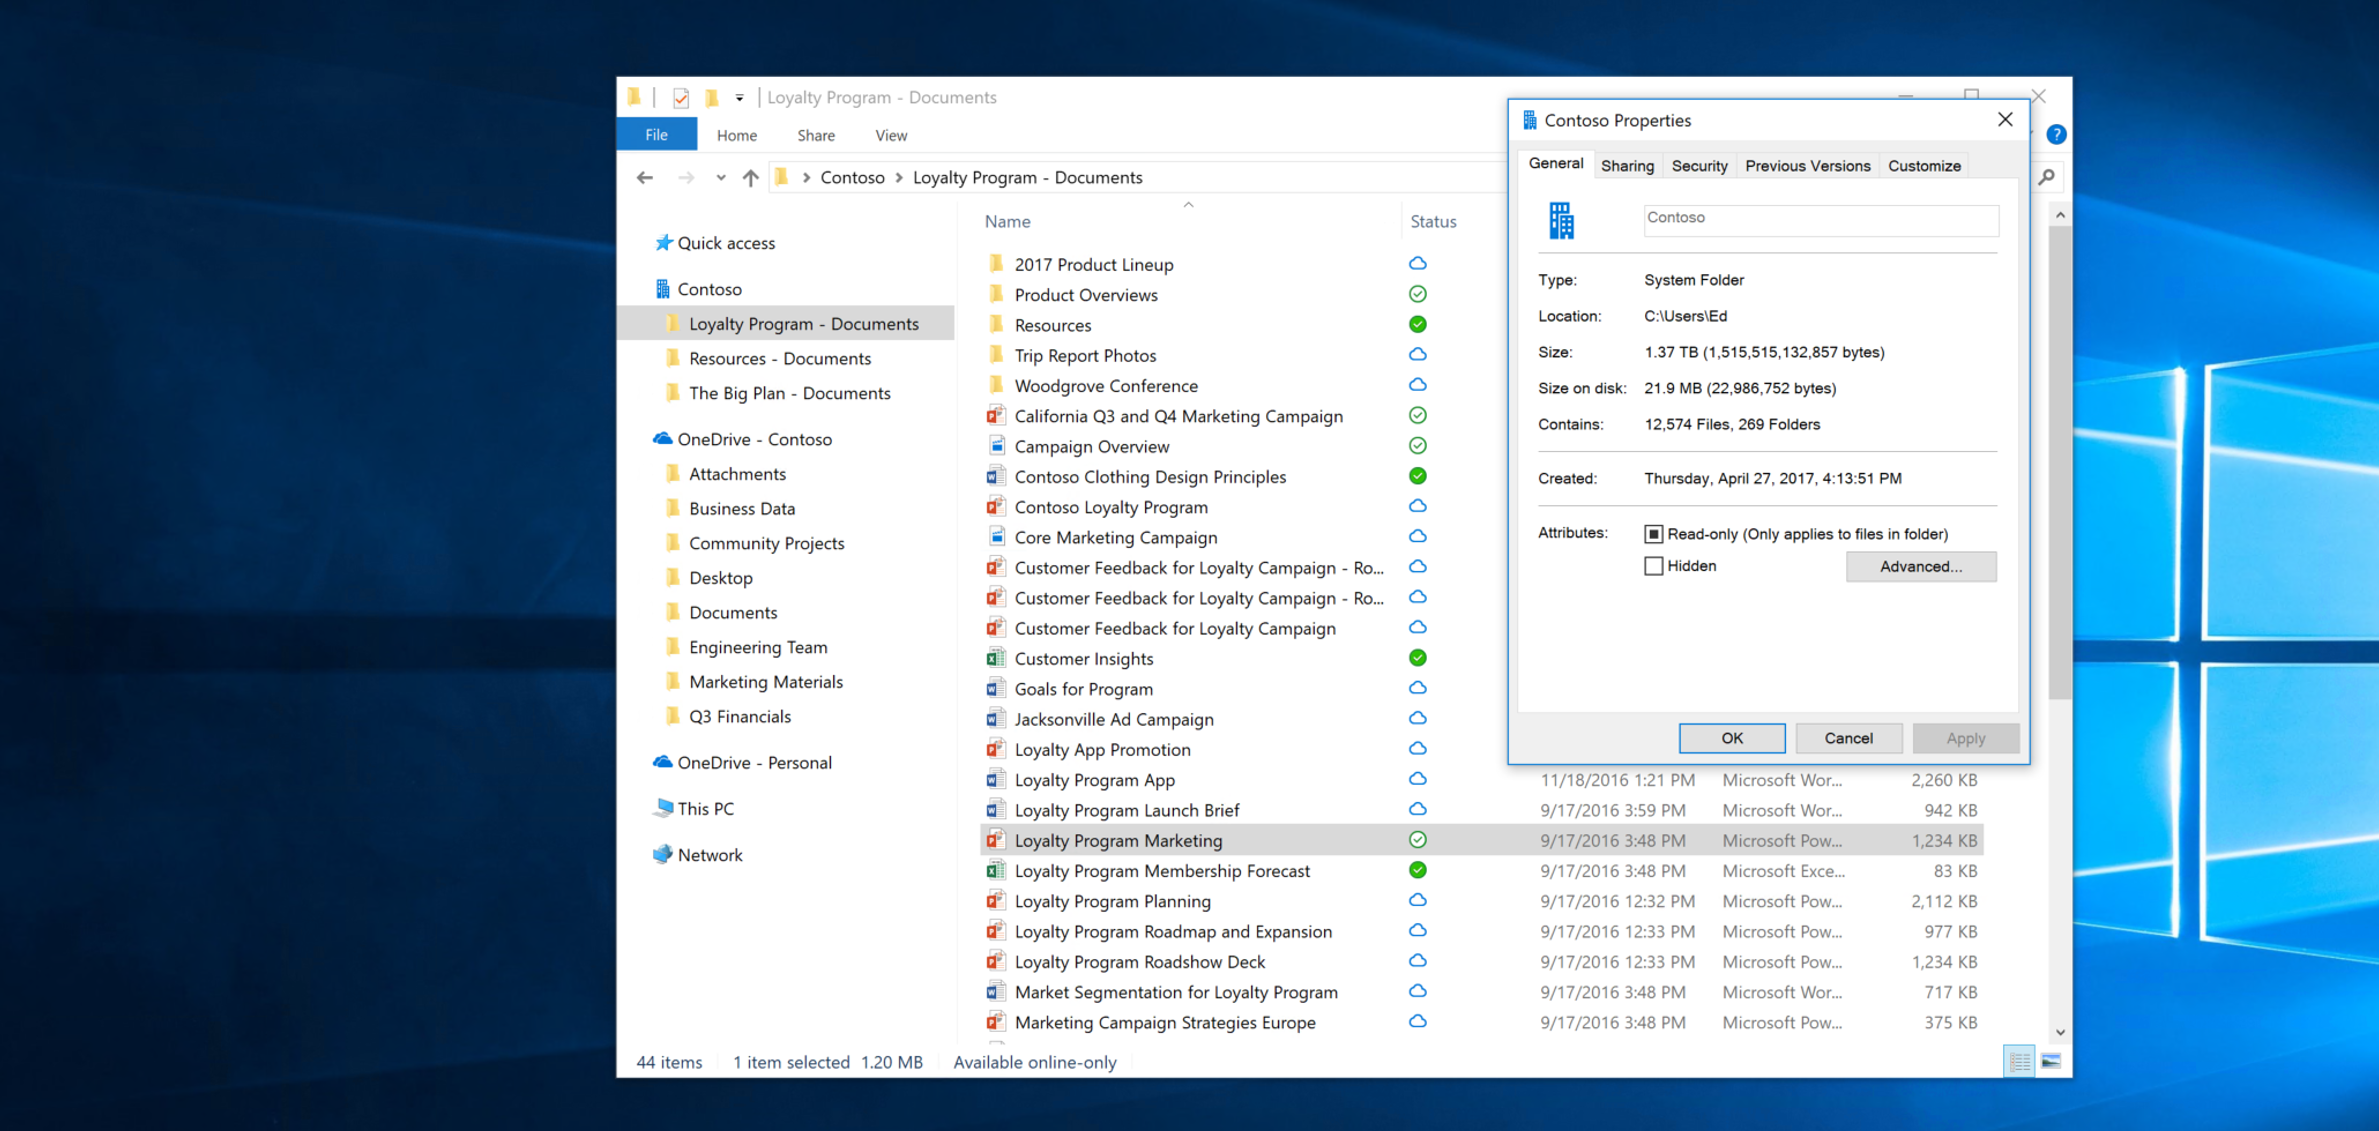 OneDrive Files On-Demand: Access all your files in the cloud without having to download them and use storage space on your device. You don’t have to change the way you work, because all your files – even online files – can be seen in File Explorer and accessed on-demand whenever they are needed.